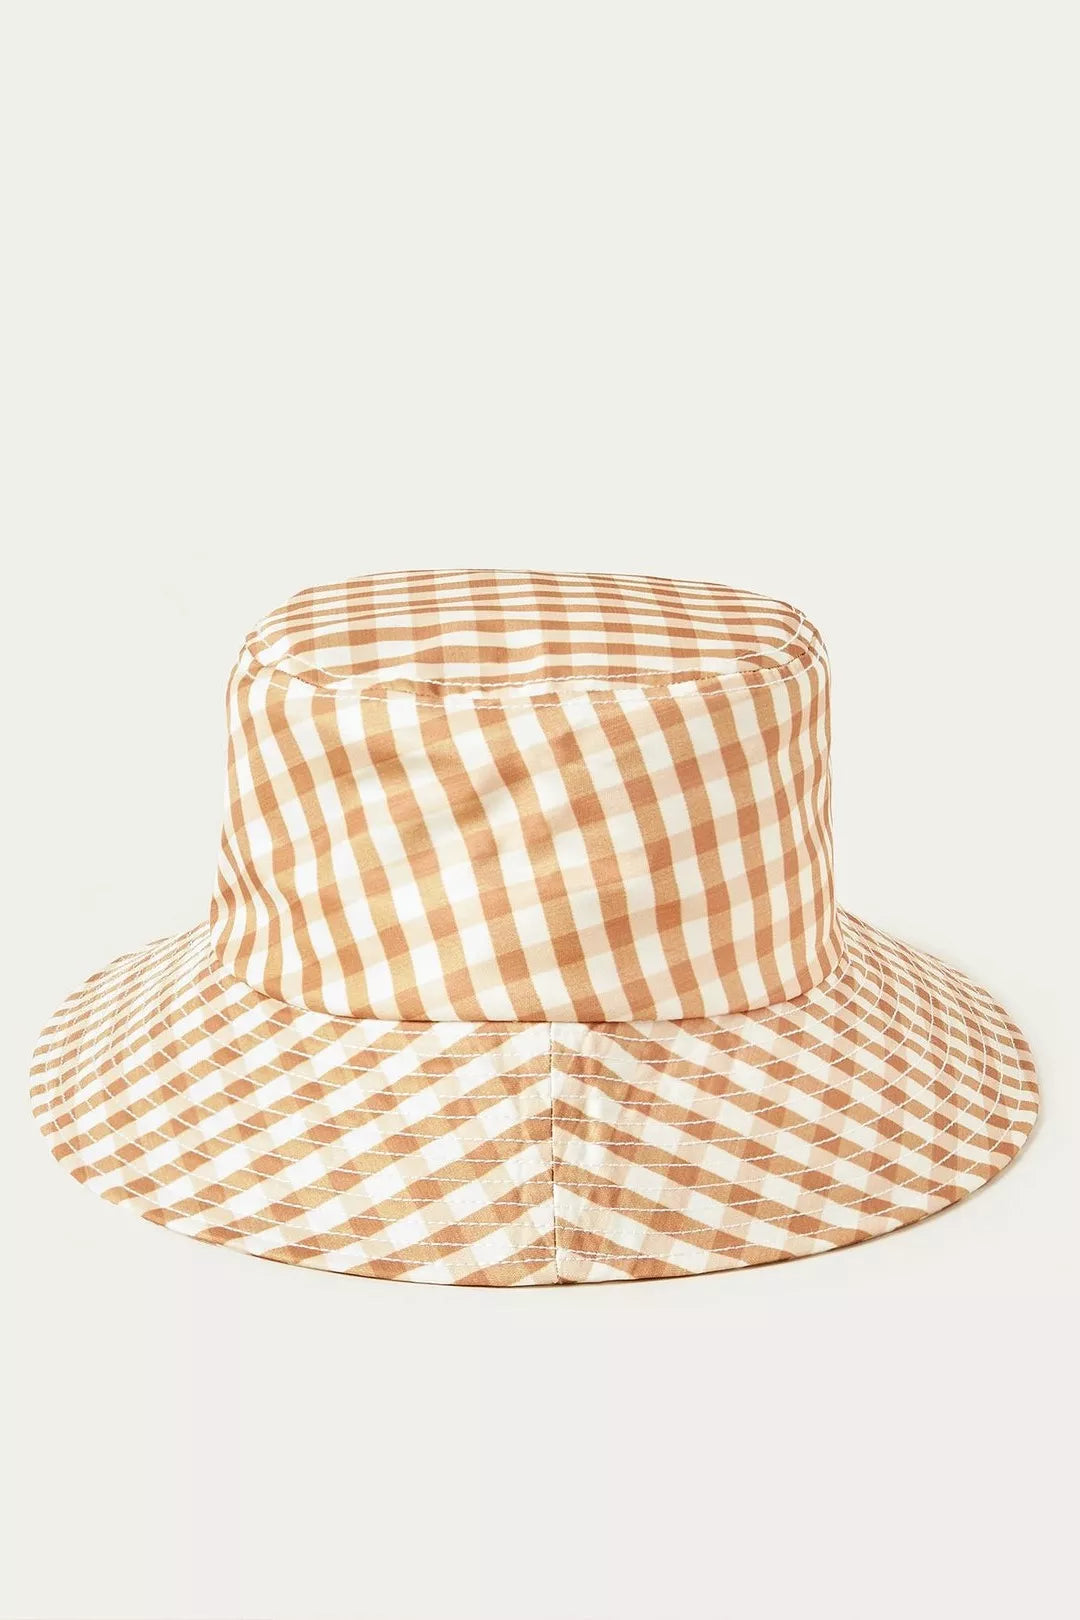 Summer Hats To Love